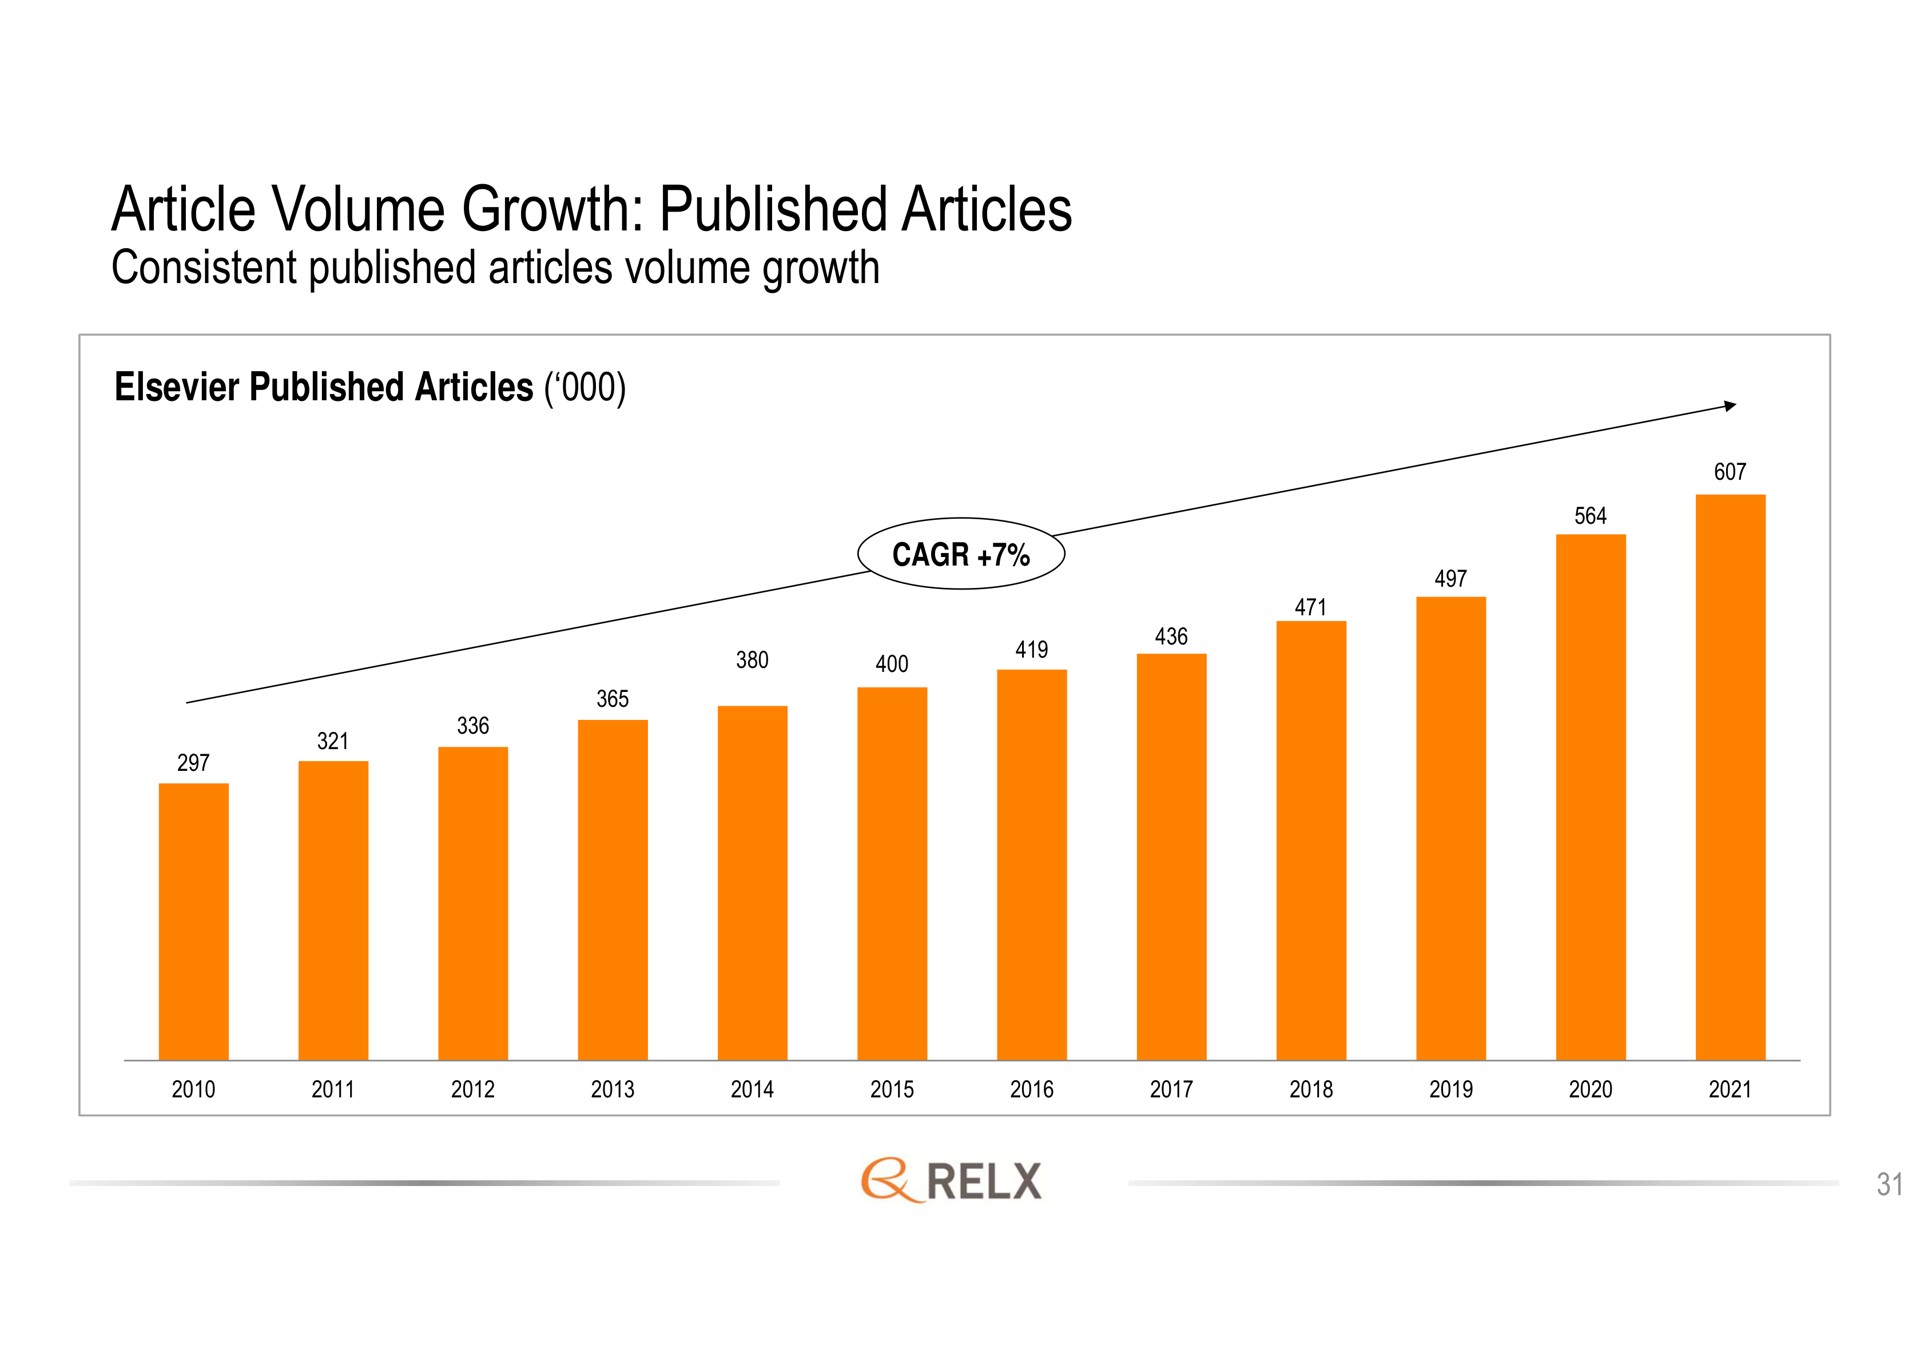 article volume growth published articles consistent published articles volume growth | RELX